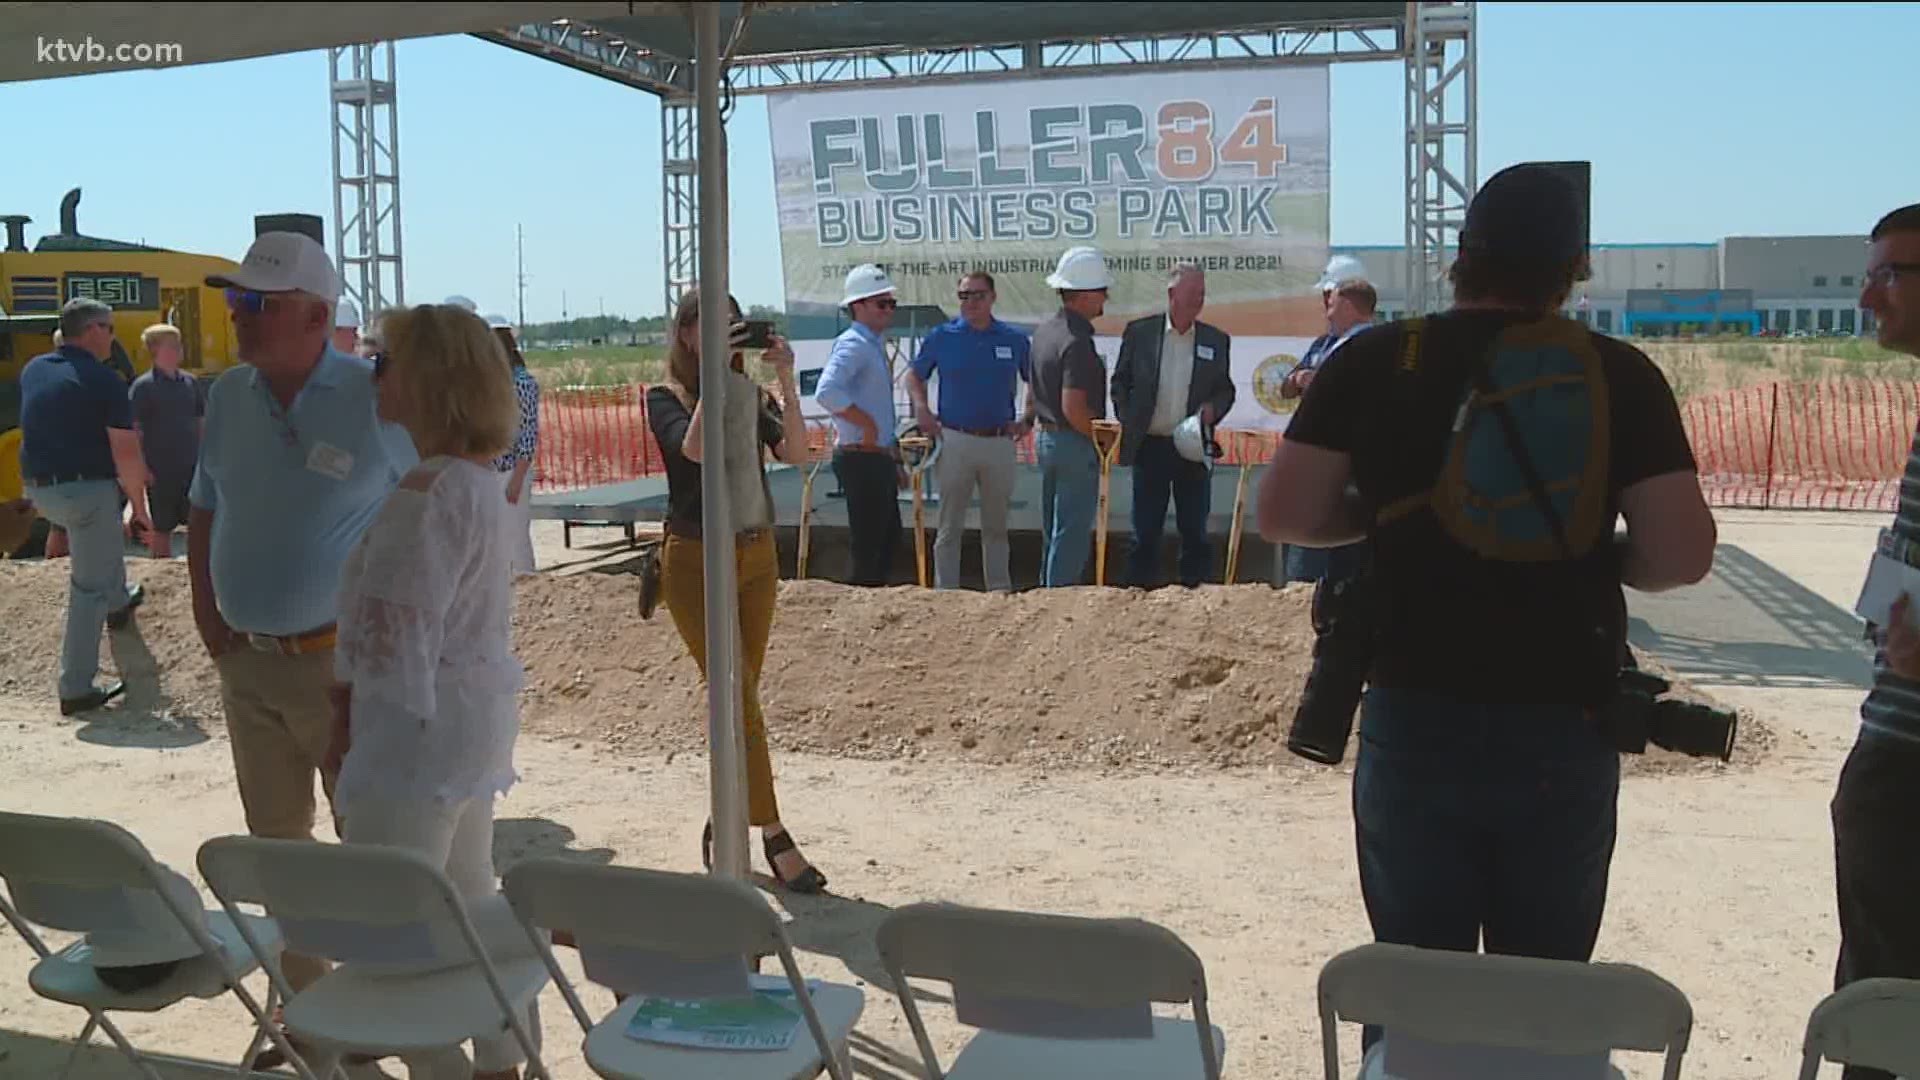 The 64-acre business park is being built across the street from the Amazon distribution center.